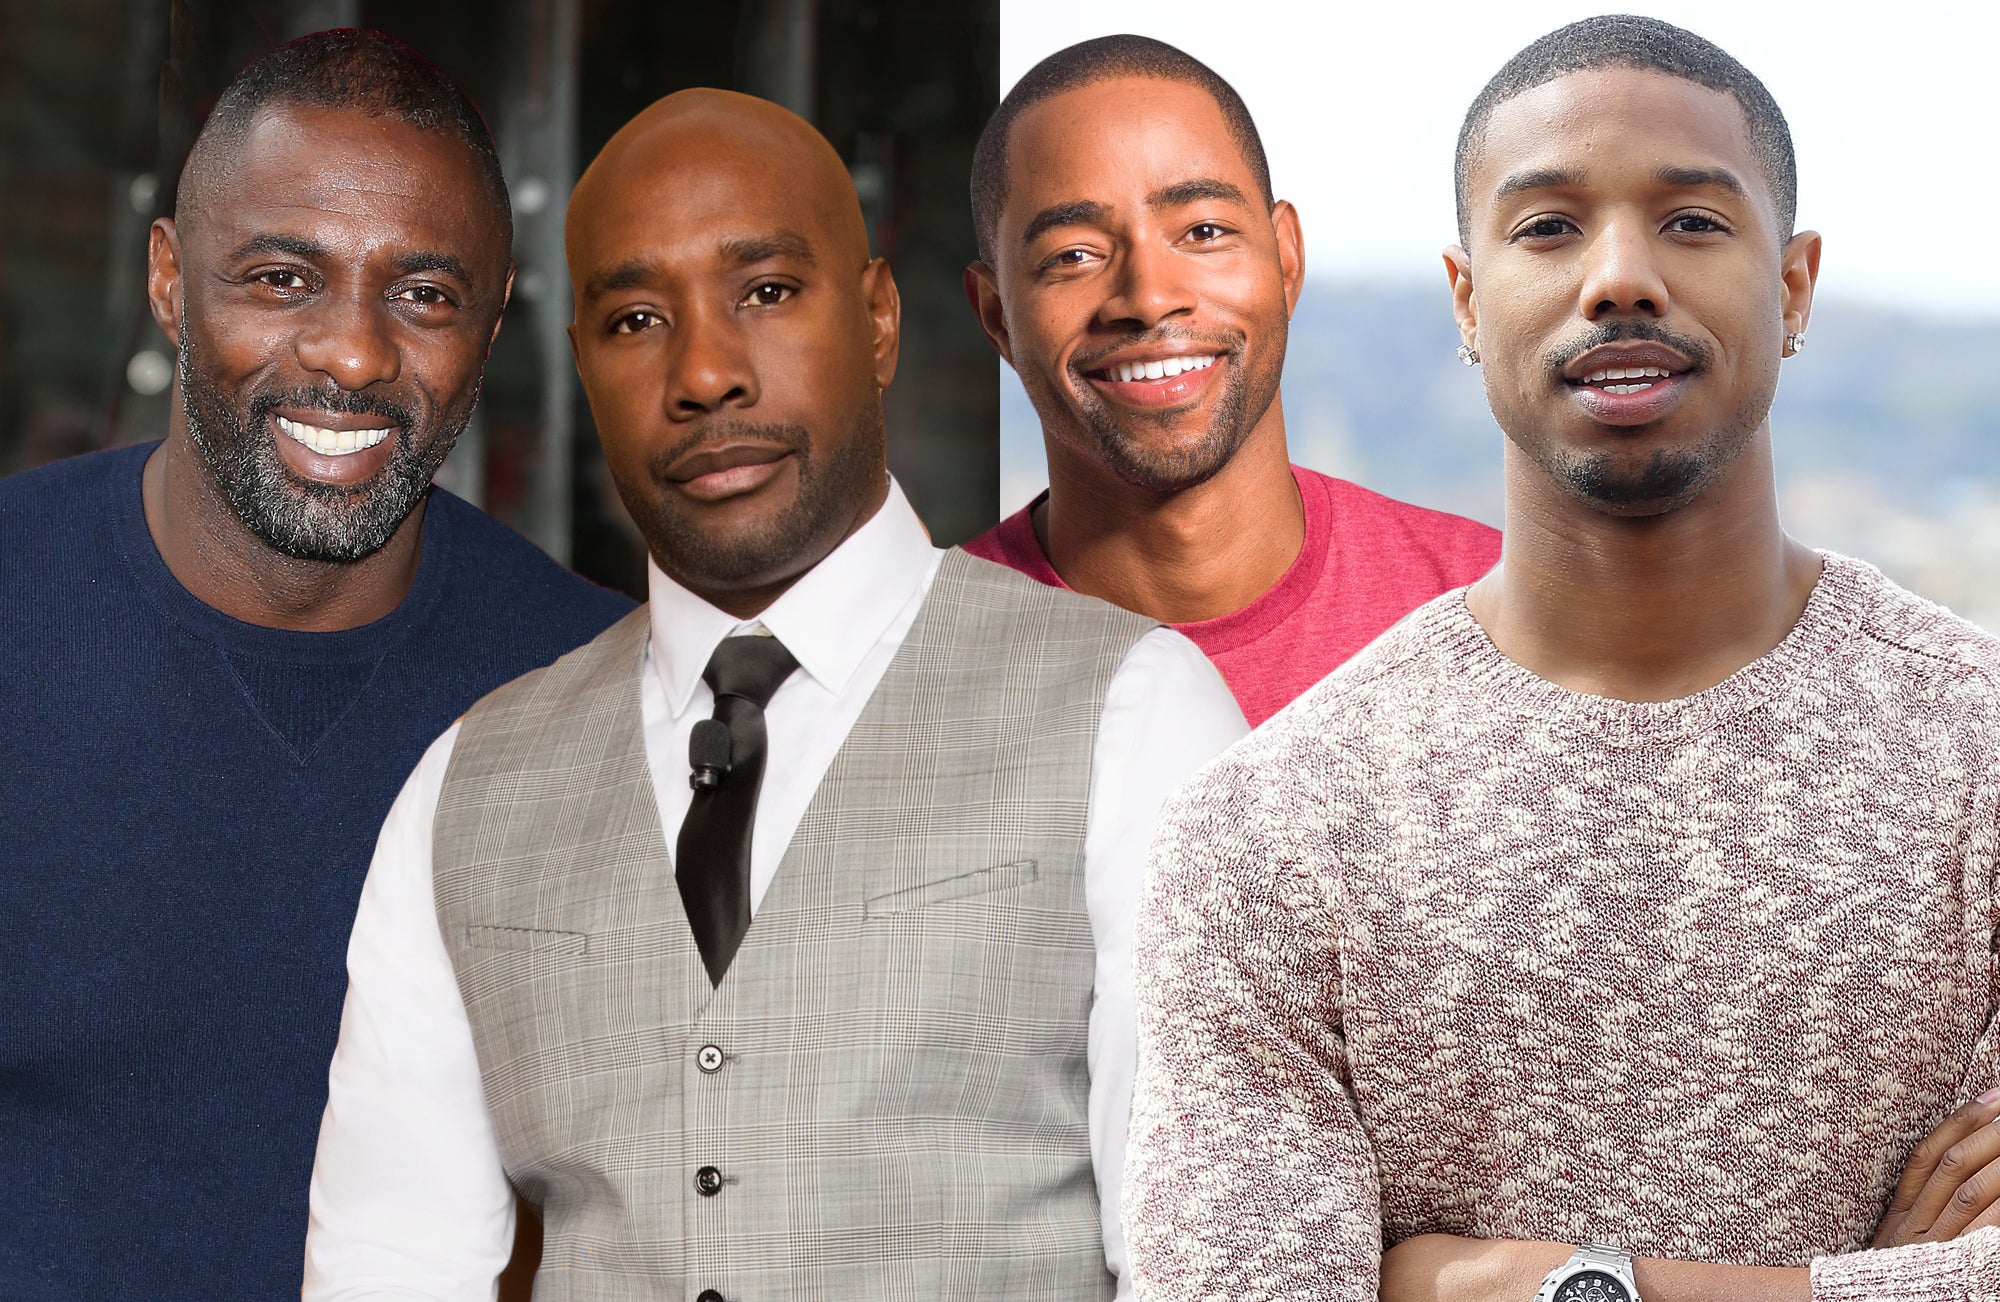 Close Call! Your Votes Are In! The Sexiest Man of 2015 Is...